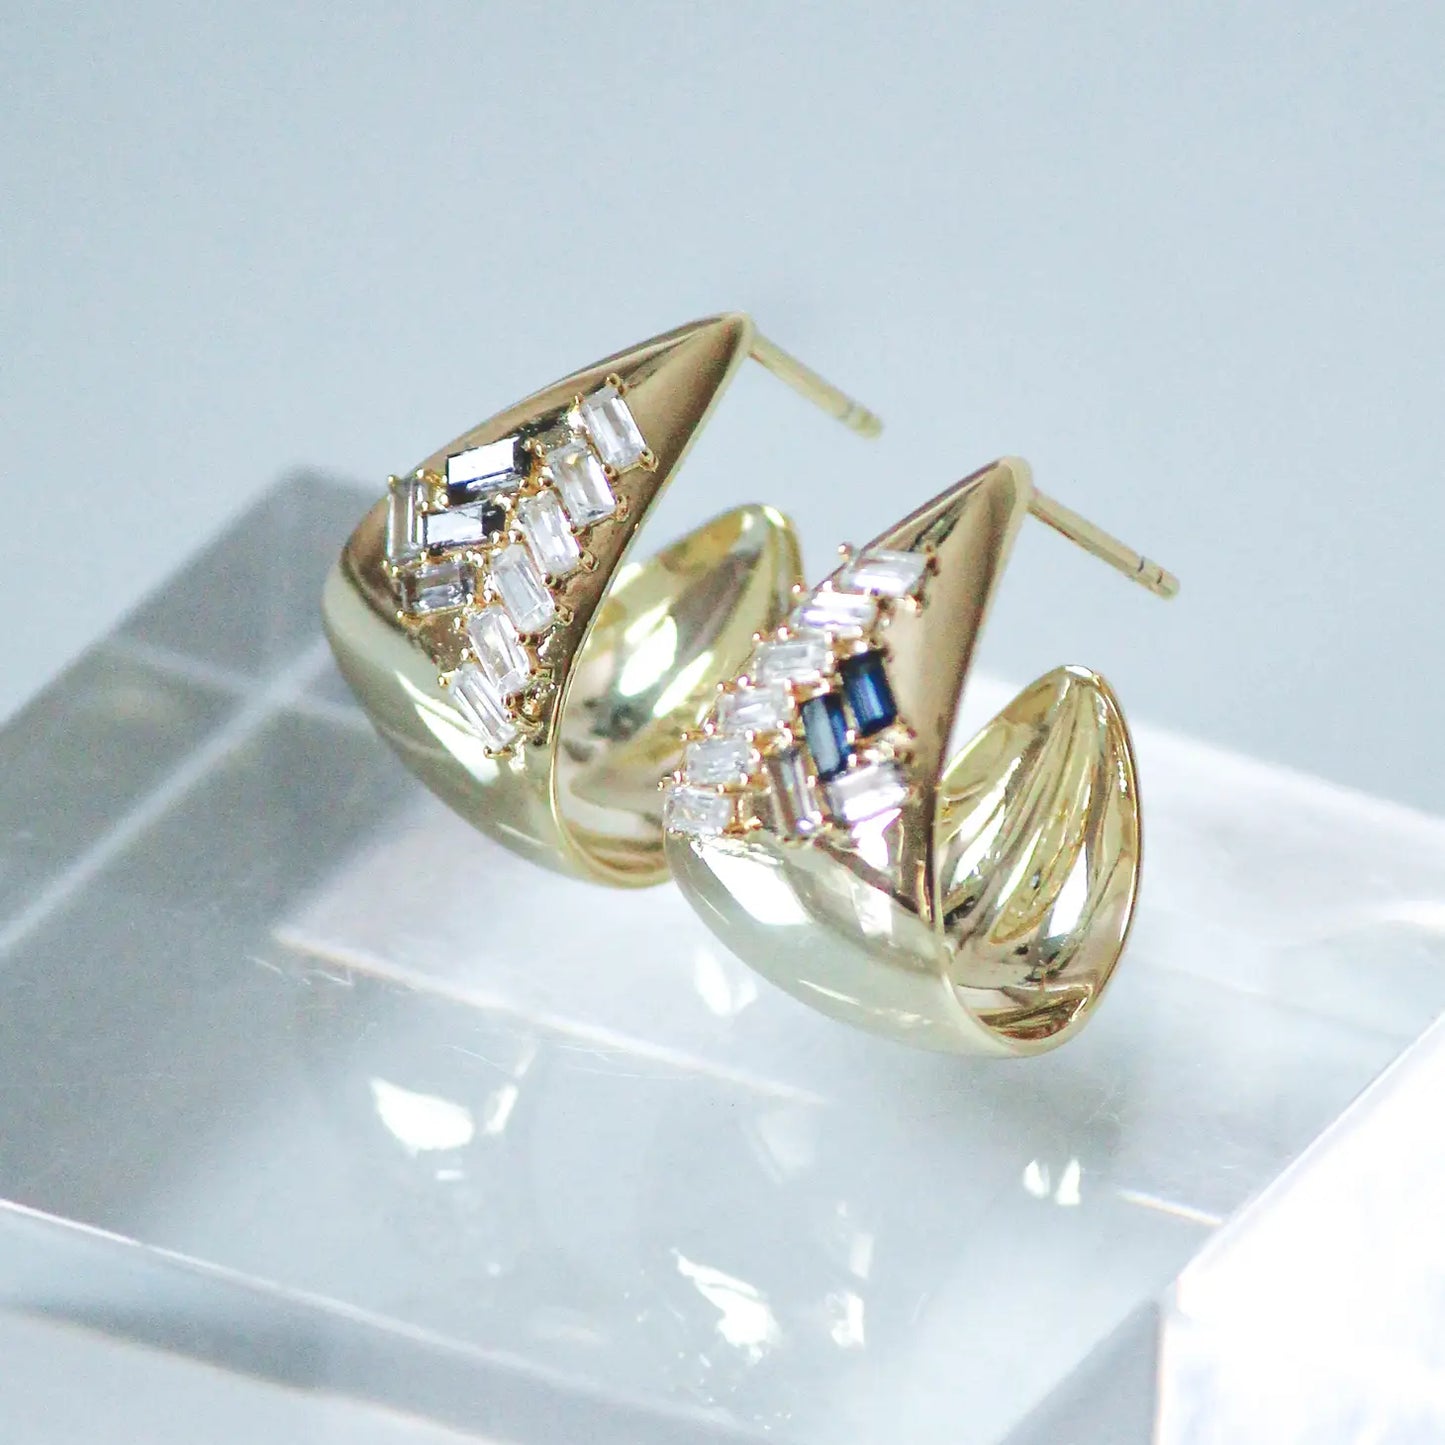 These 14K gold vermeil hoop earrings feature Black, Gray and Clear baguettes.